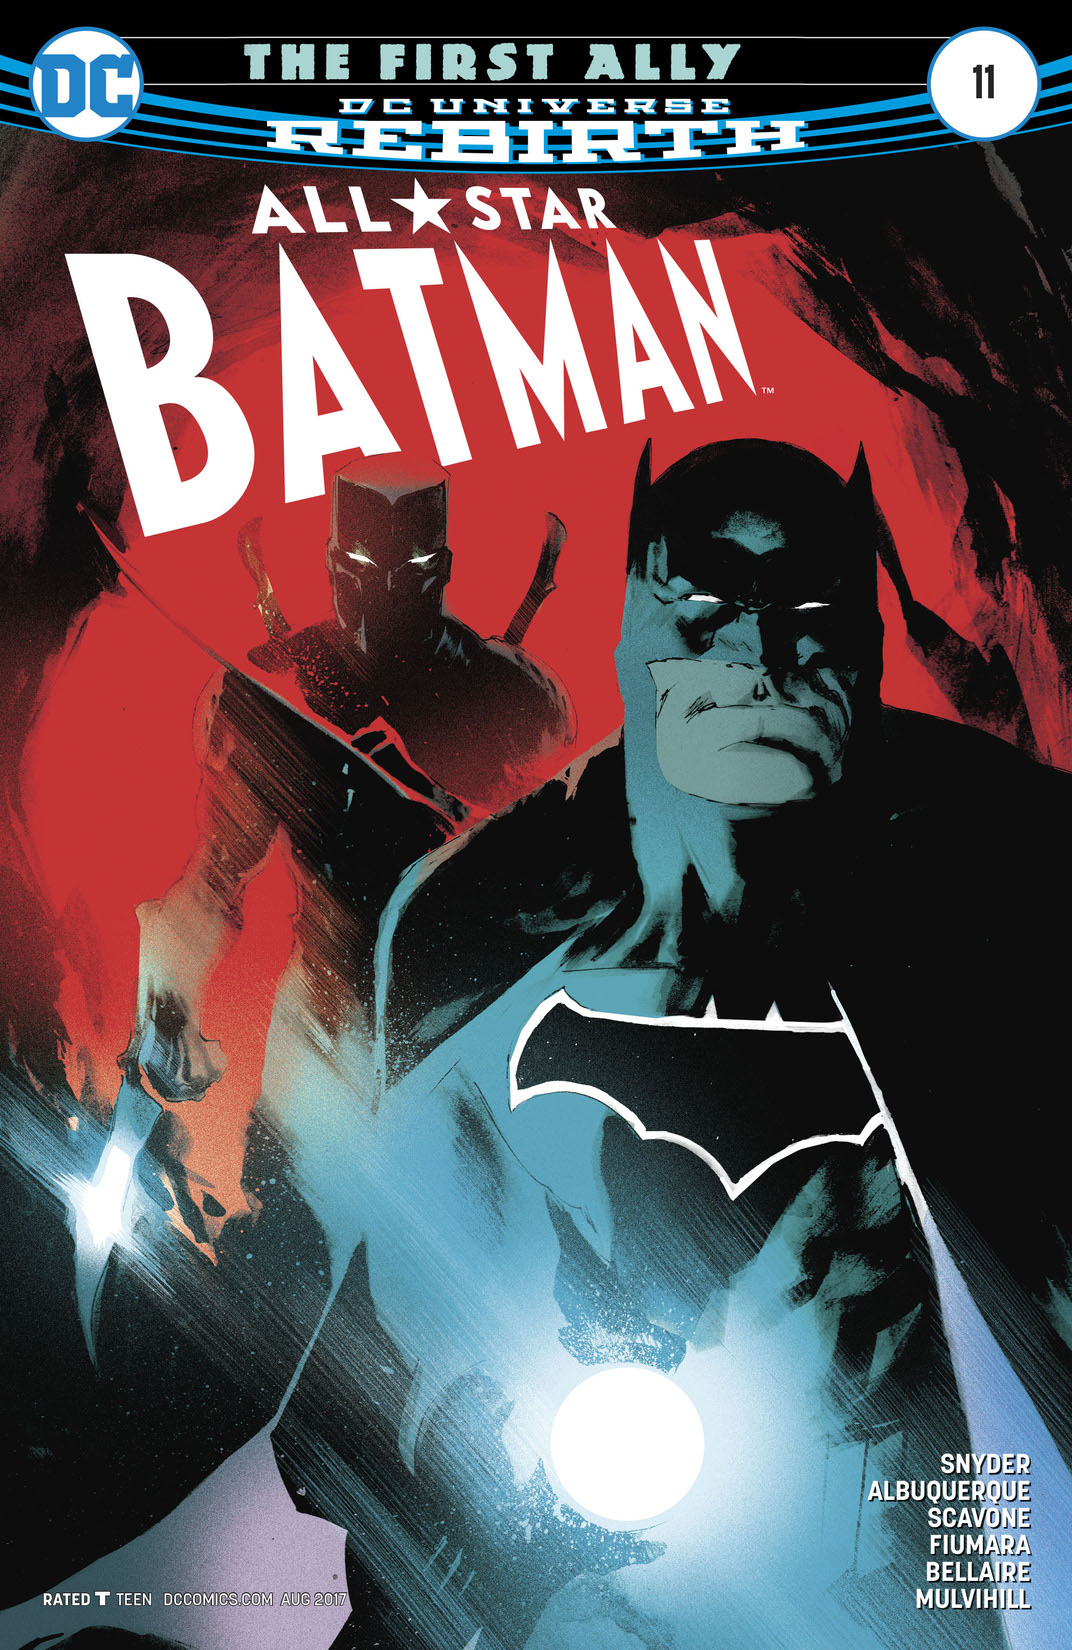 All Star Batman #11 preview images